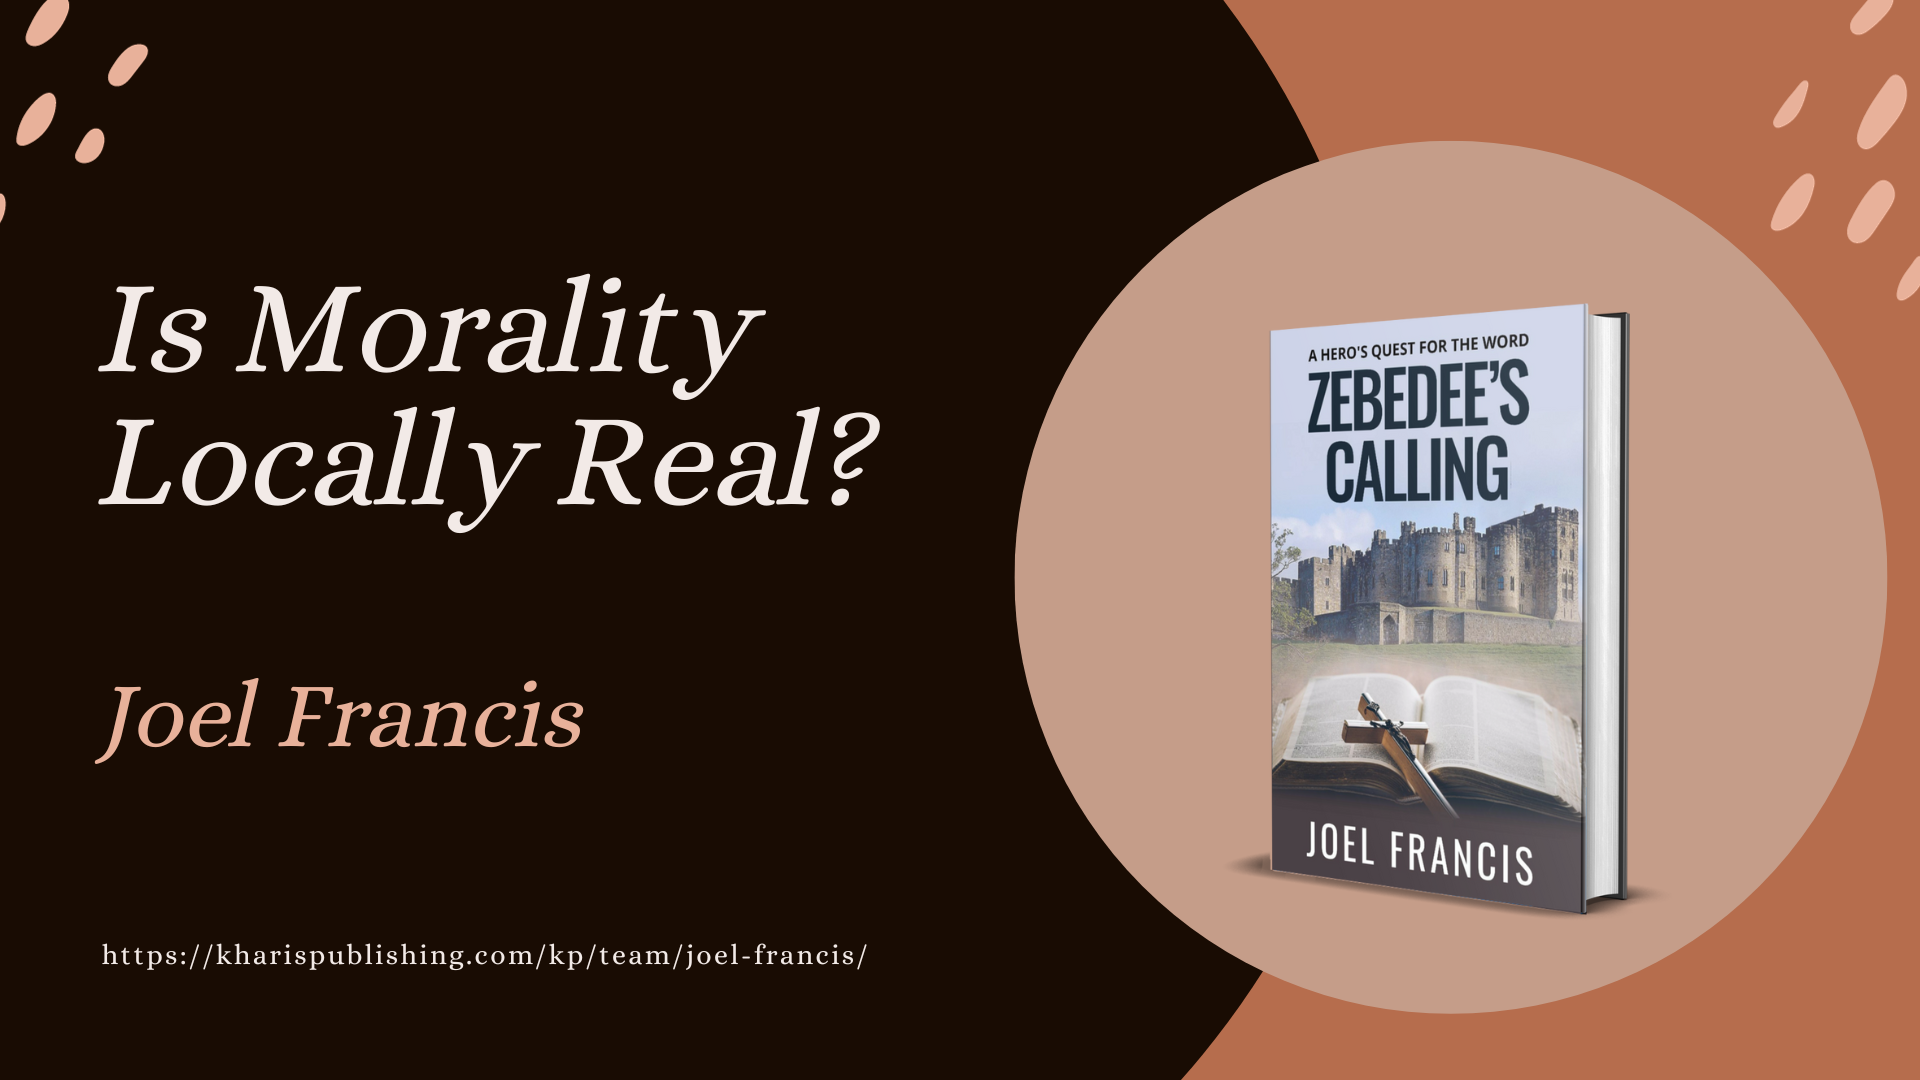 Is Morality Locally Real? - Zebedee's Calling by Joel Francis